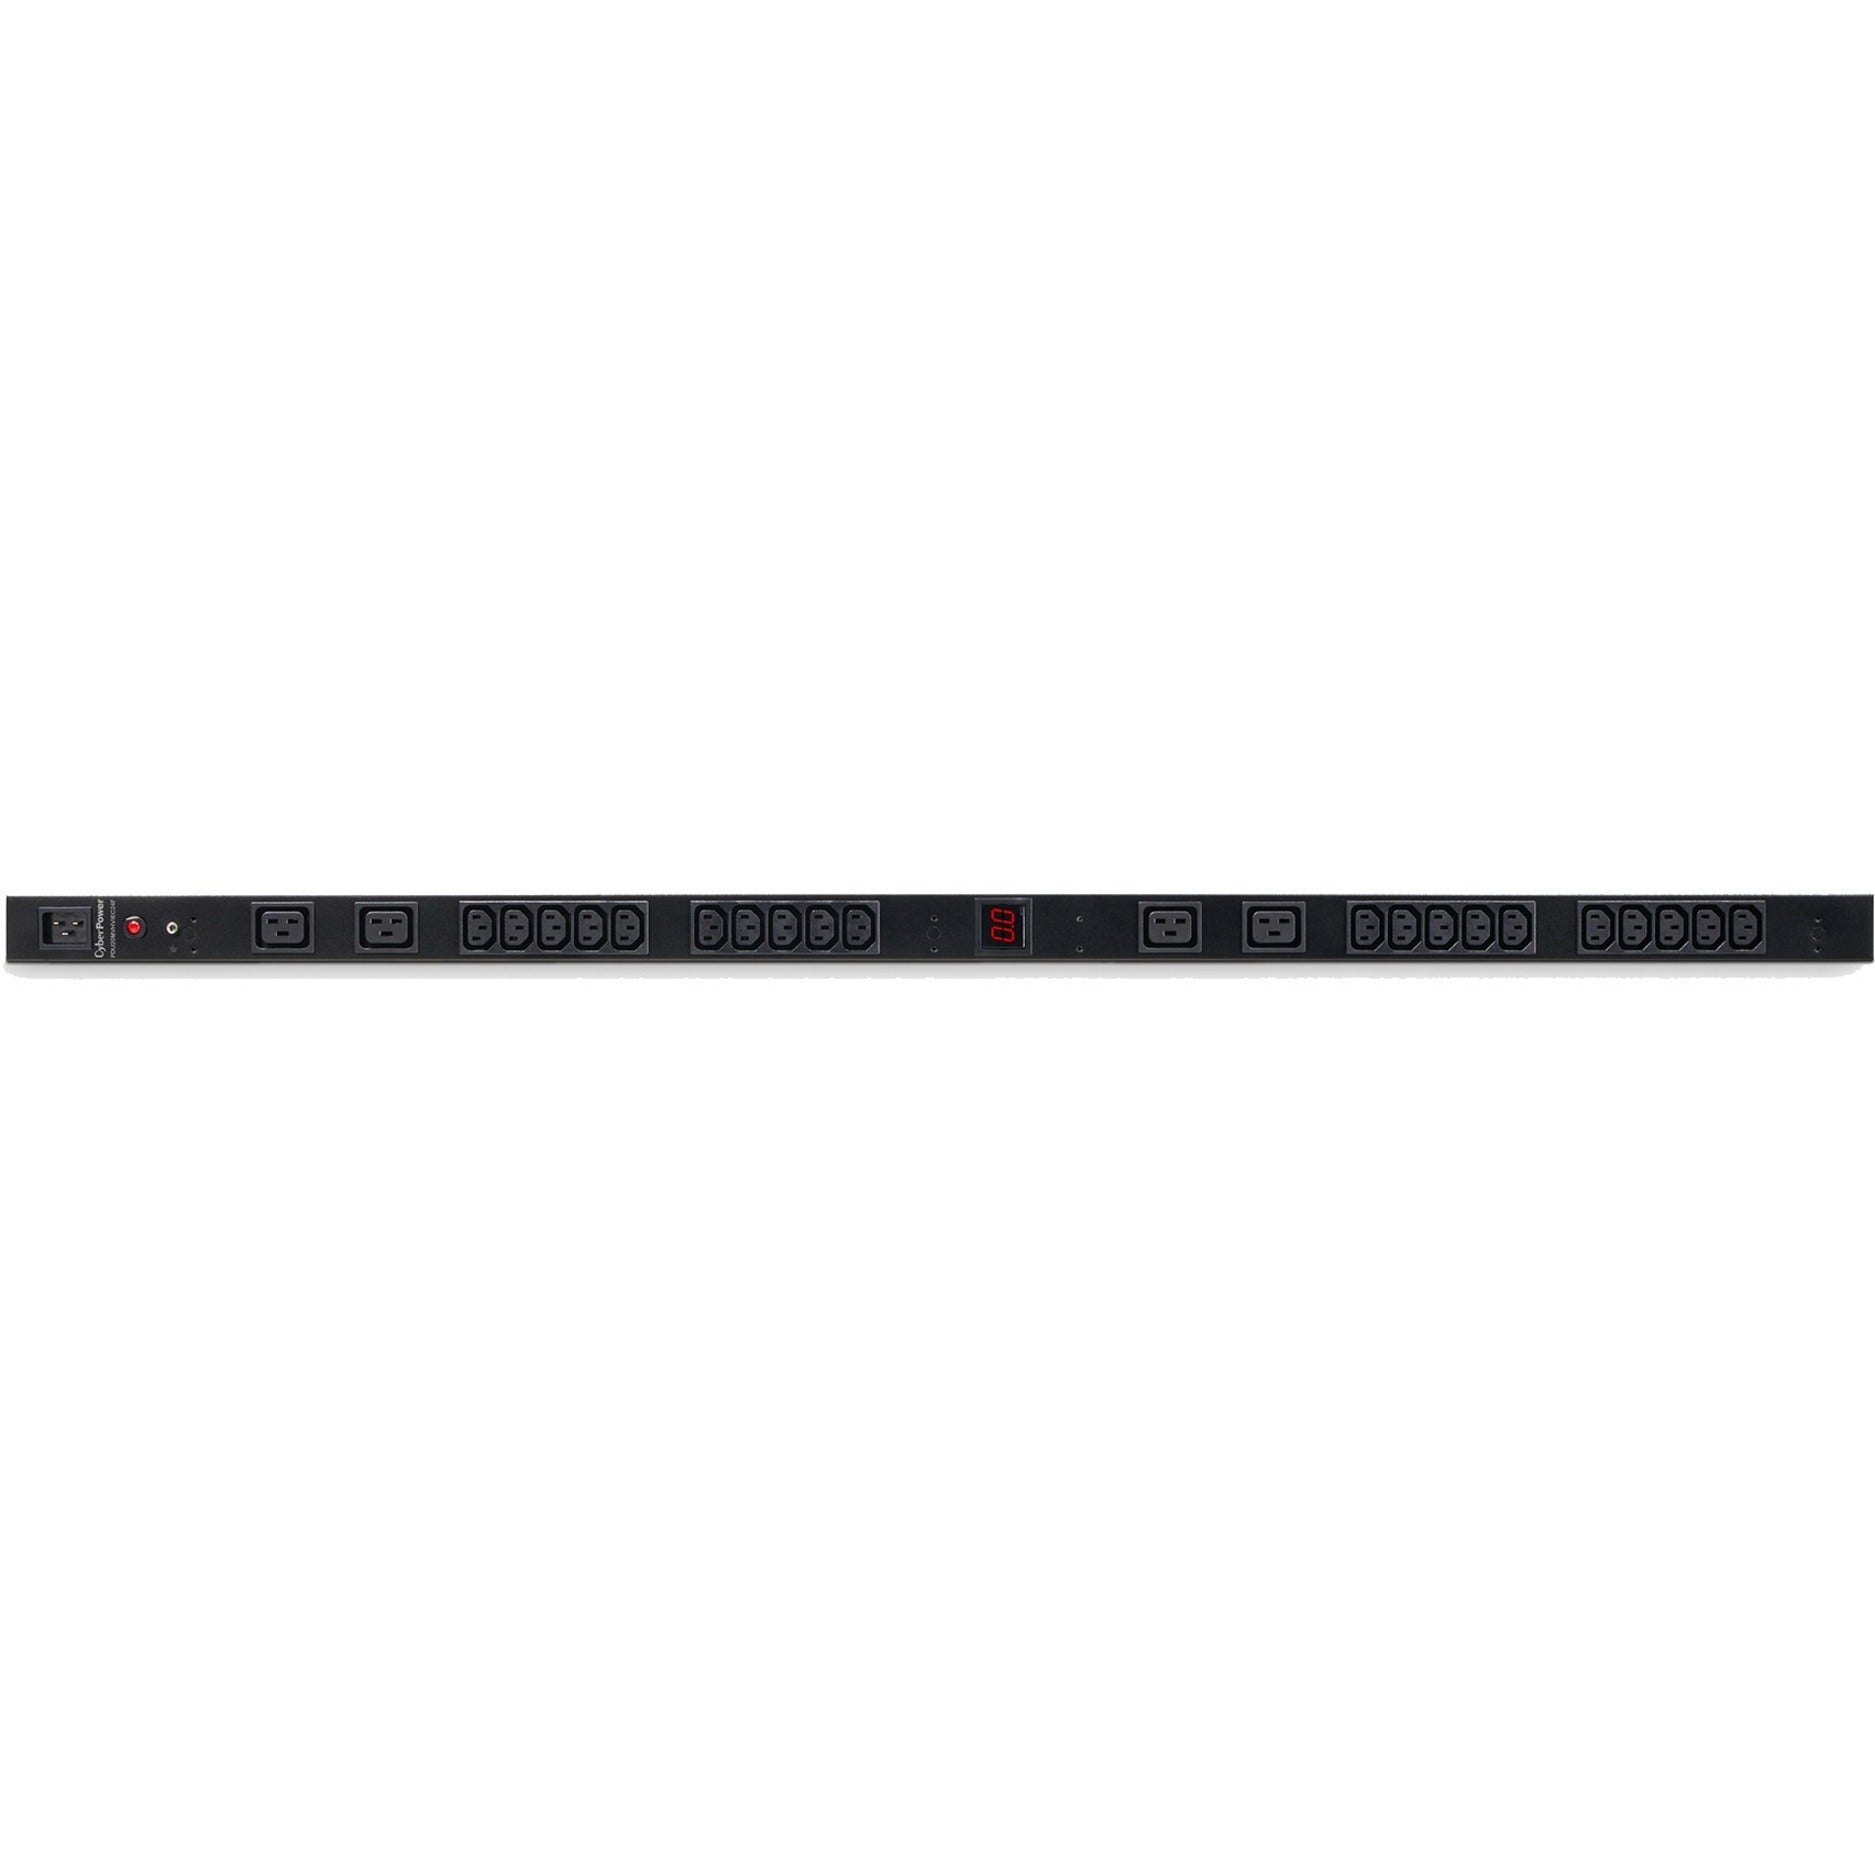 CyberPower PDU20MVHVIEC24F Metered PDU, 24-Outlets, 230V AC, Overload Protection